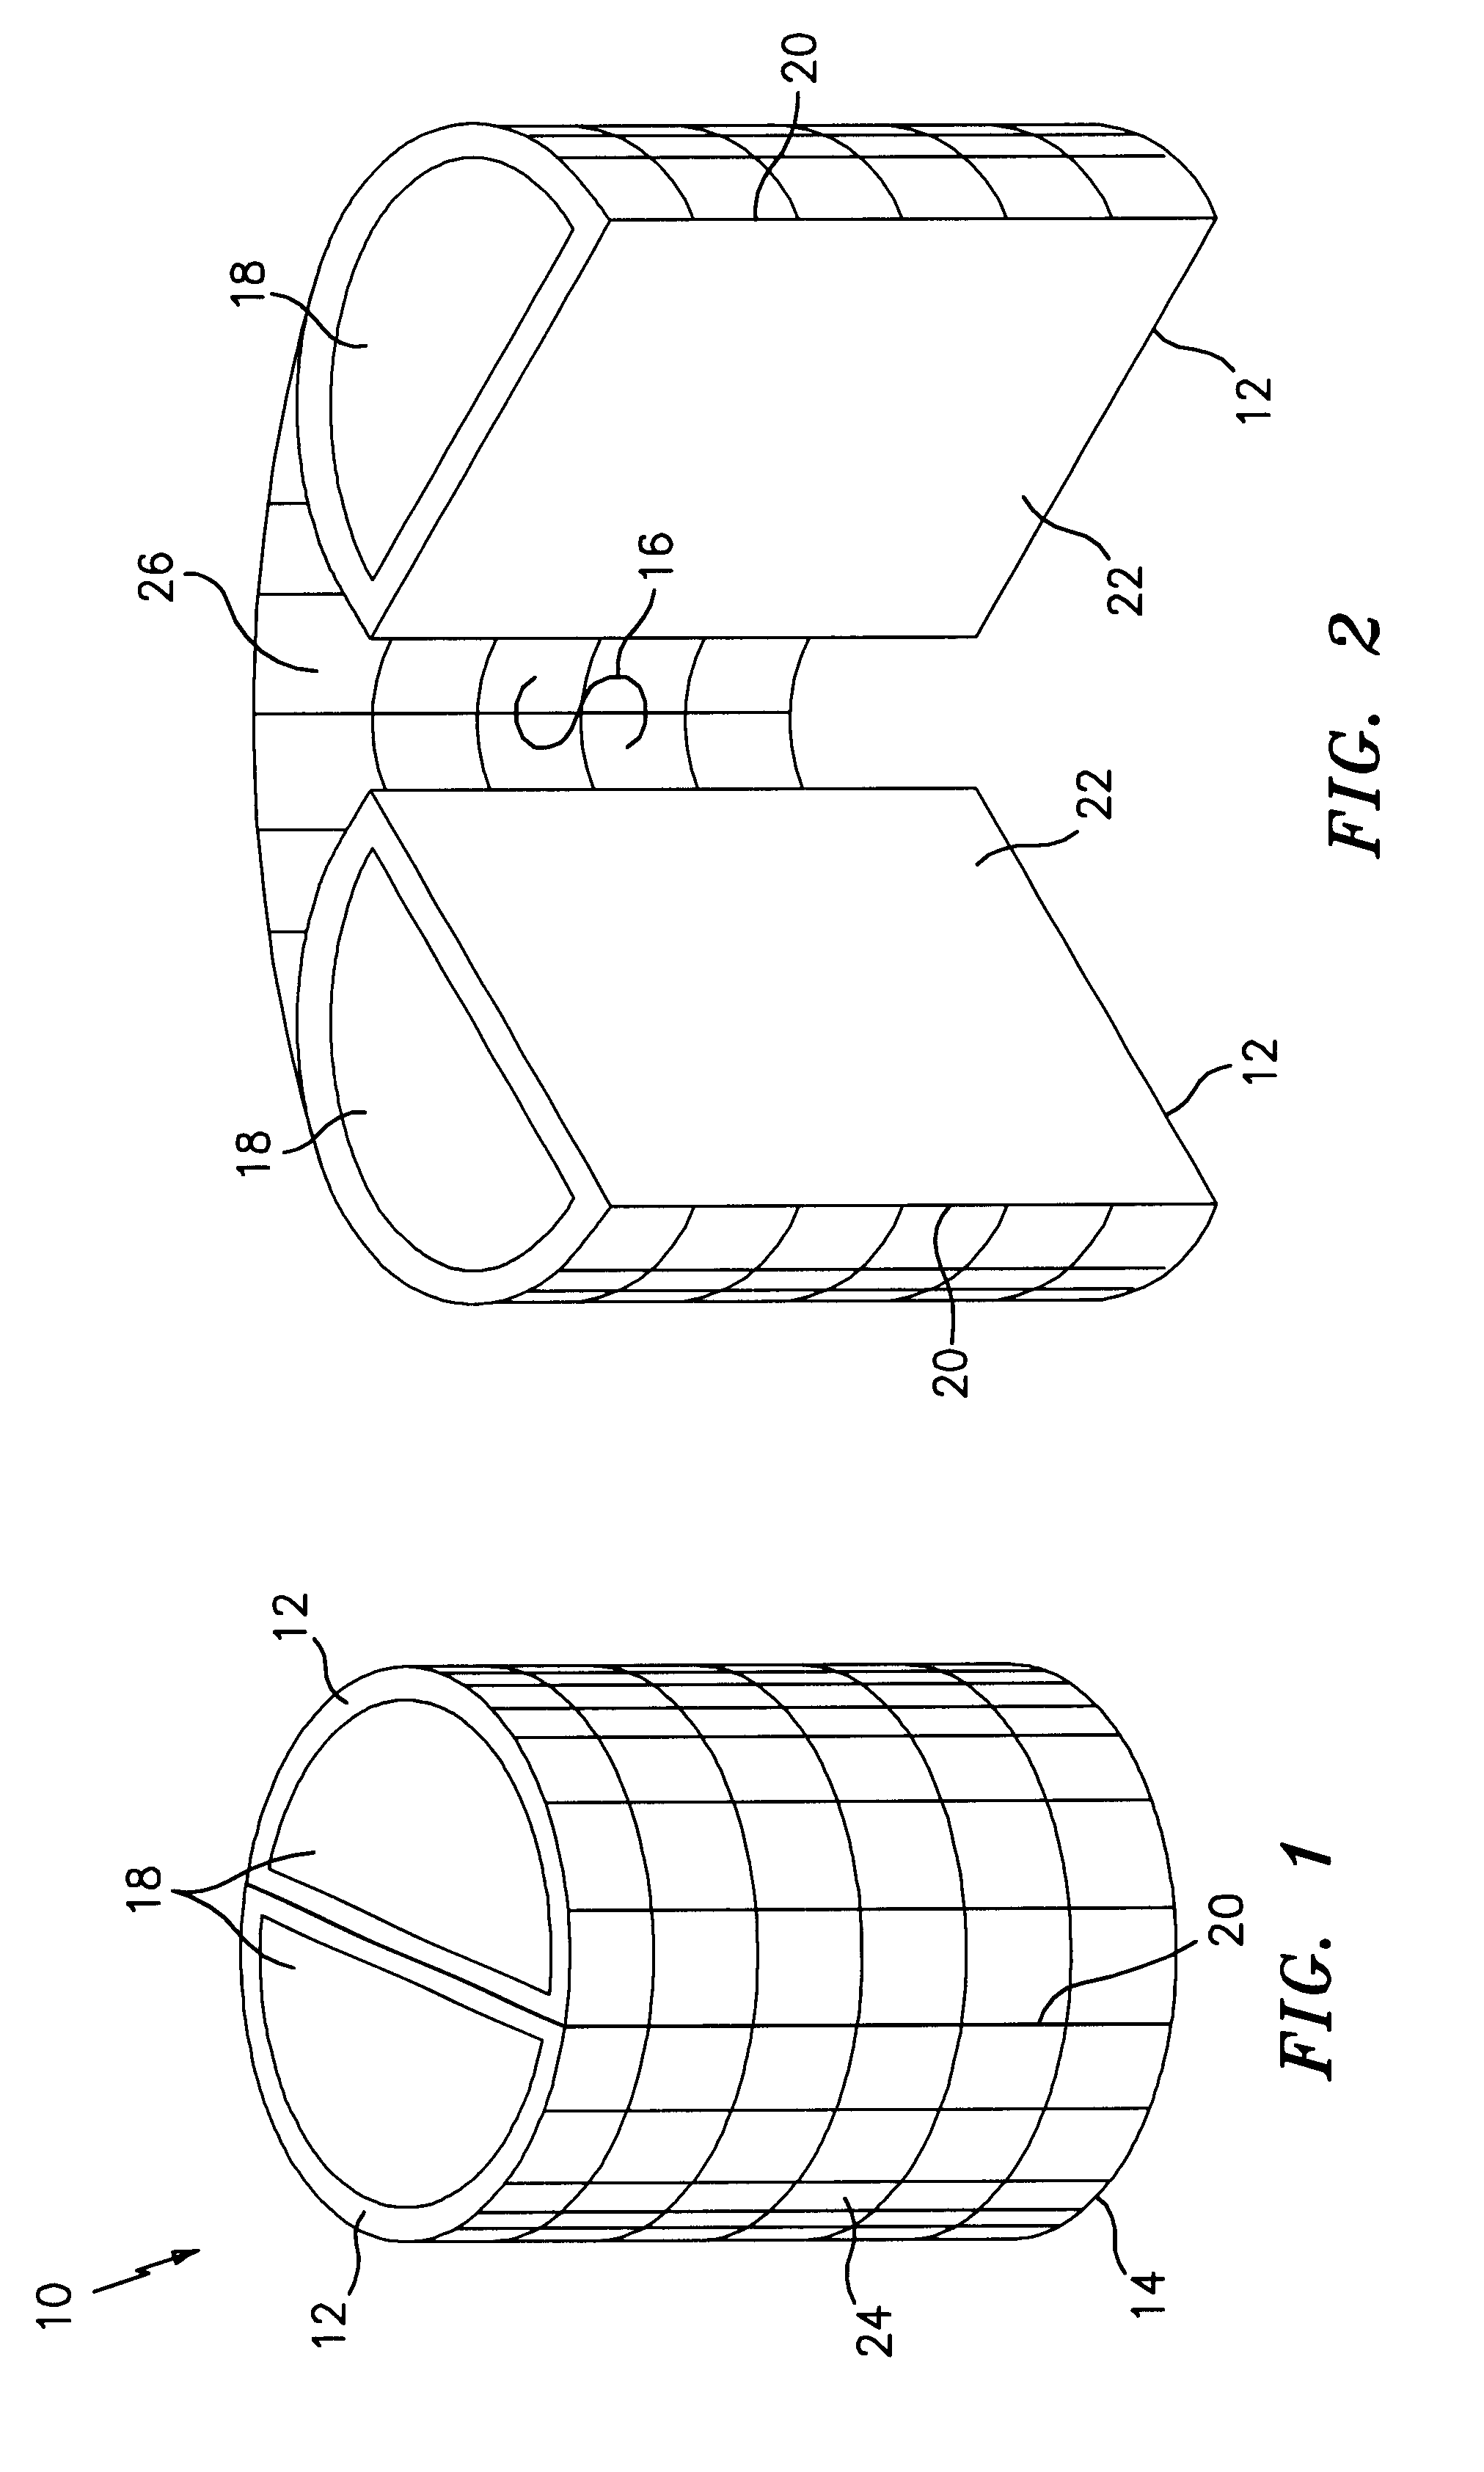 Foldable container having flat profile